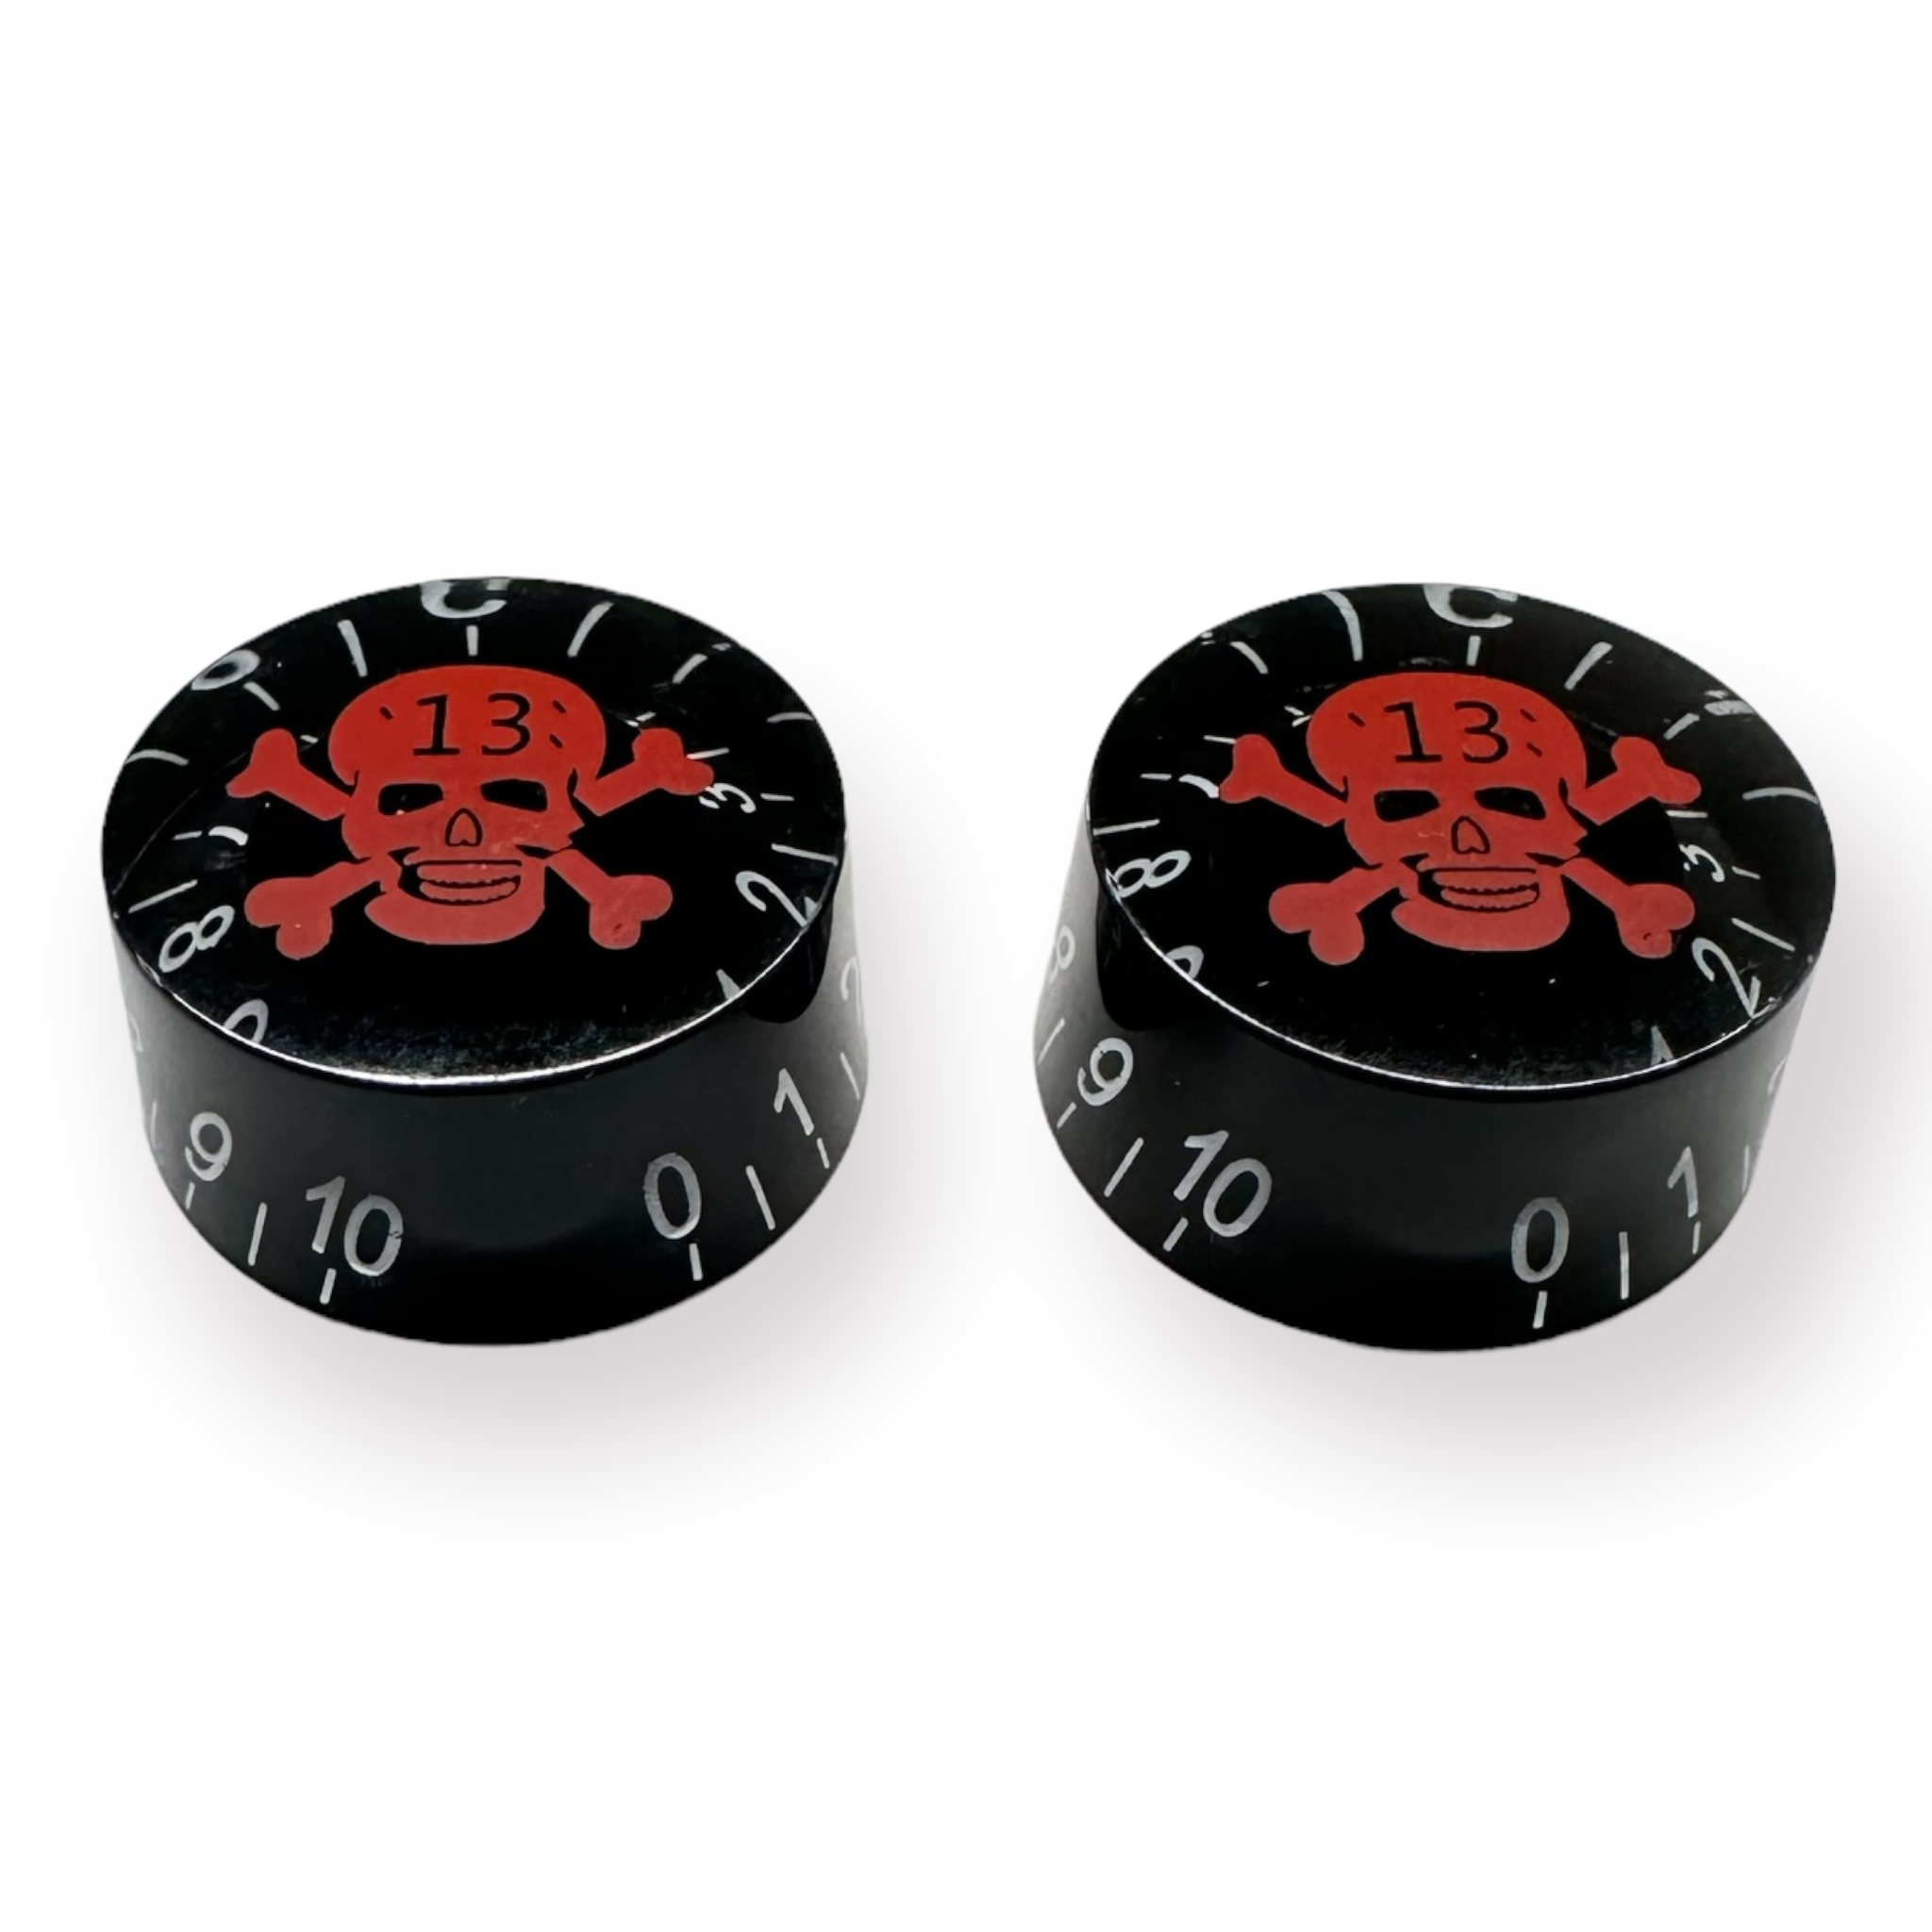 AxLabs Speed Knobs with Skull Graphic (Set of 2) - AxLabs